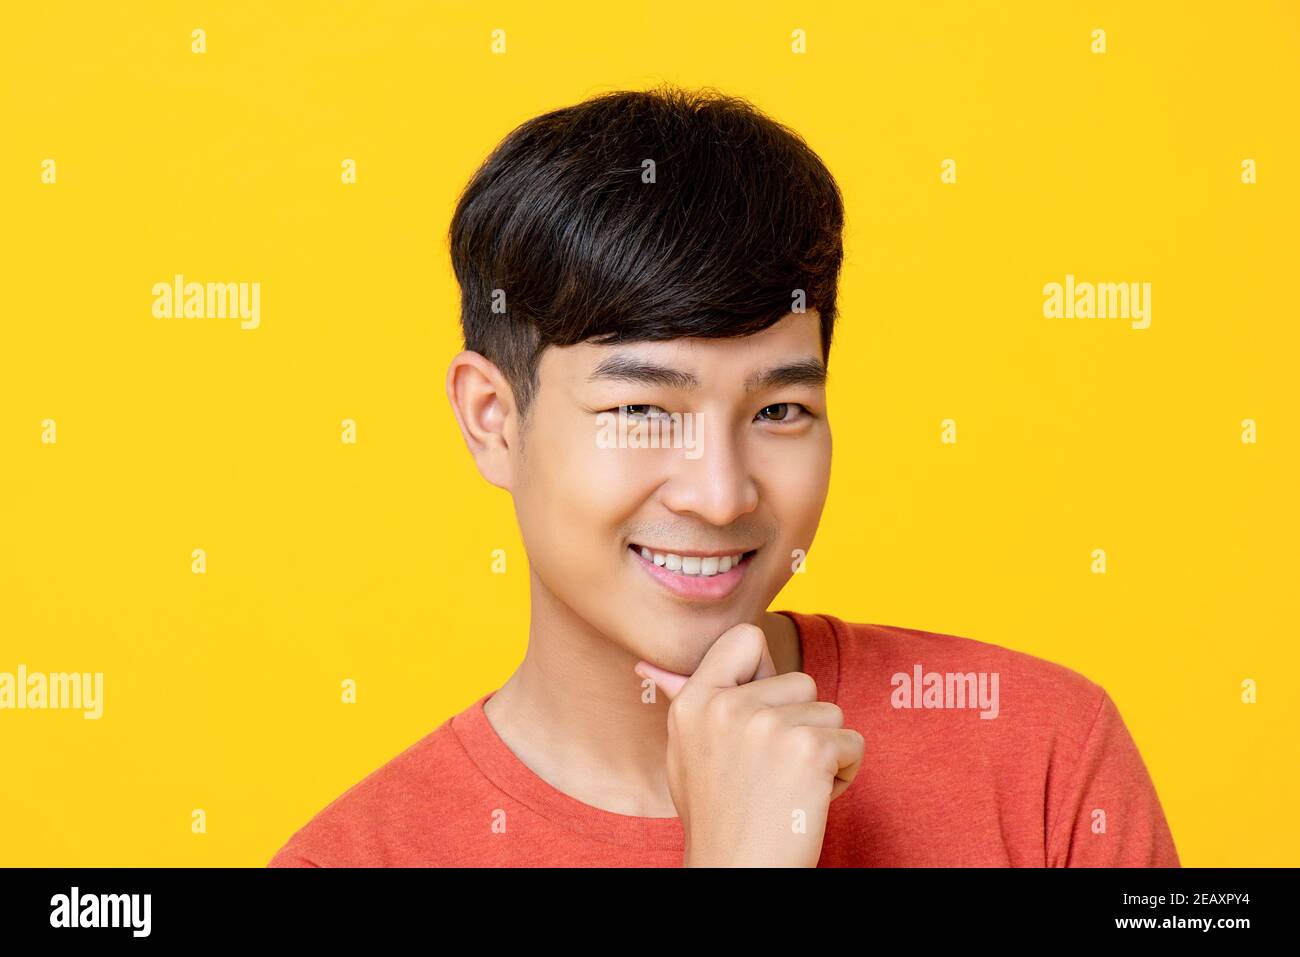 Handsome young Asian man smiling with hand on chin isolated on colorful yellow backkground Stock Photo